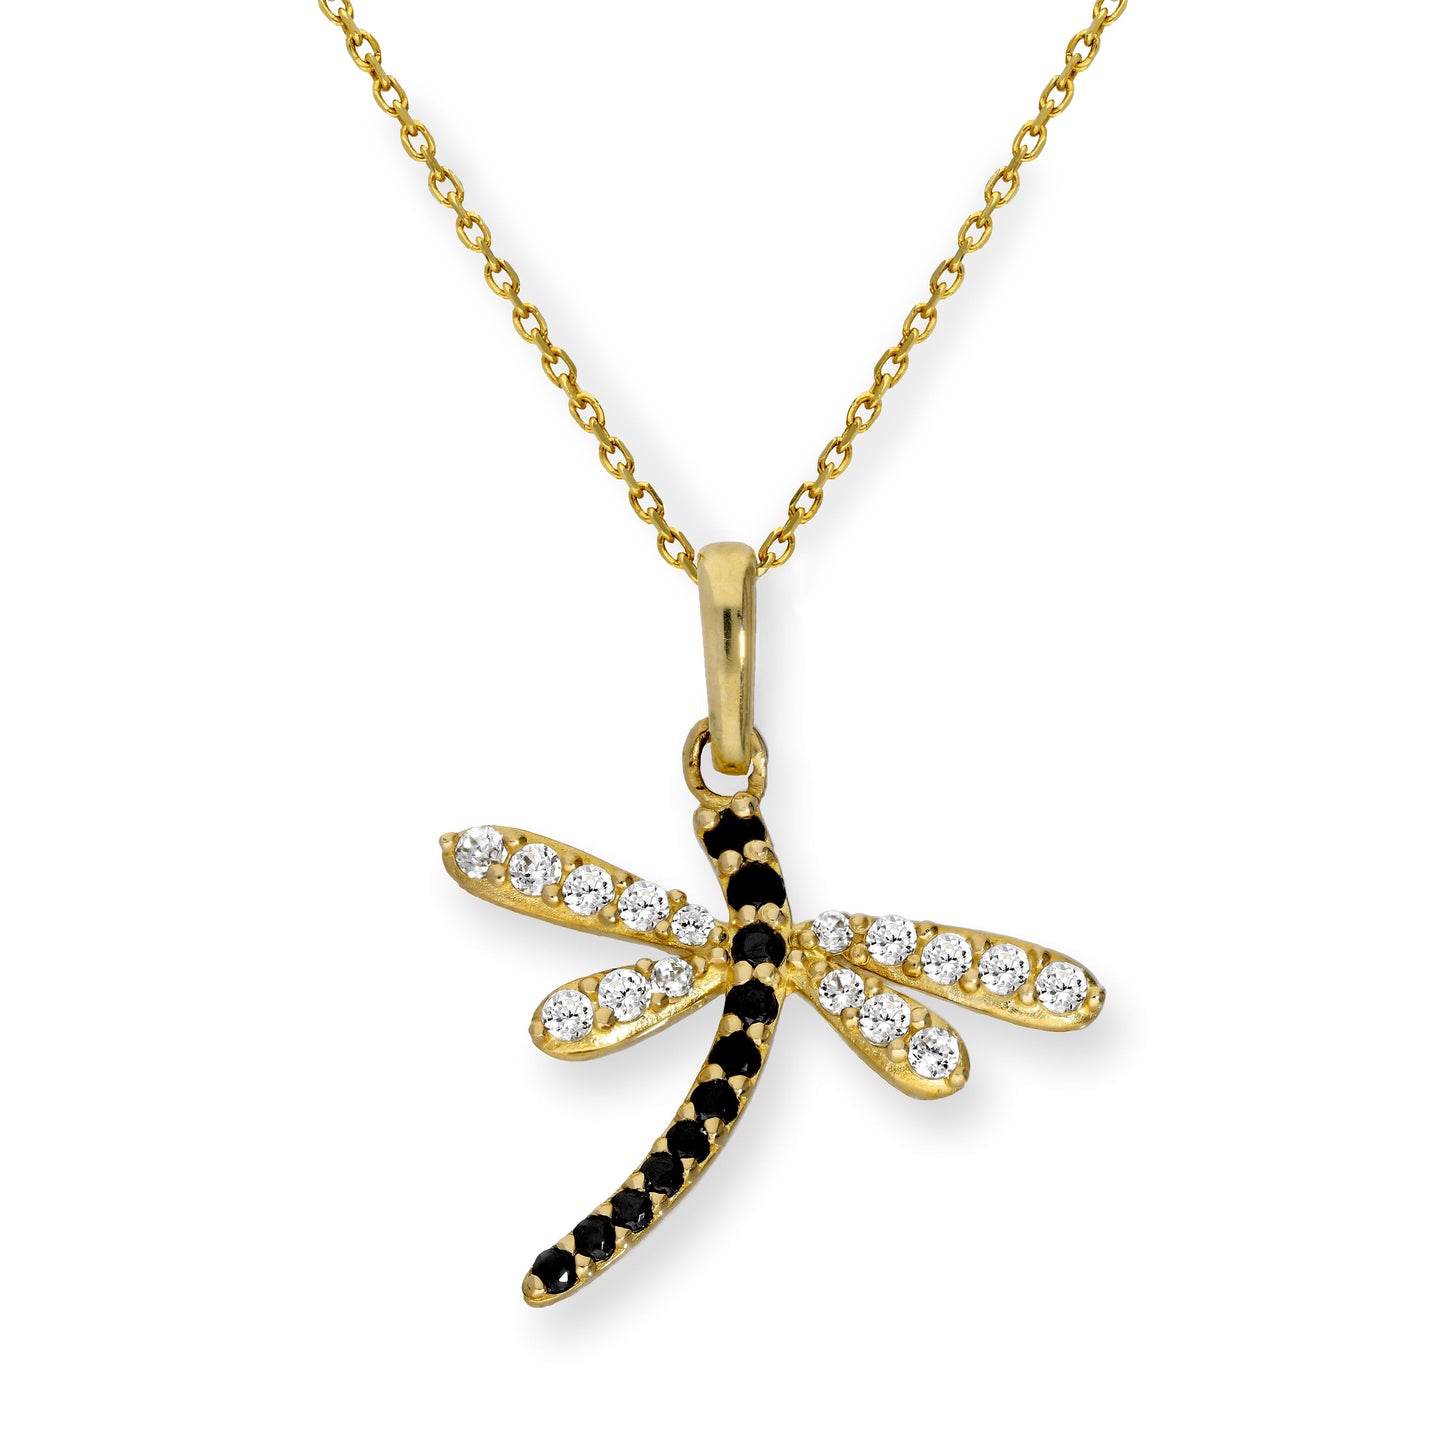 9ct Gold & CZ Crystal Dragonfly Pendant Necklace